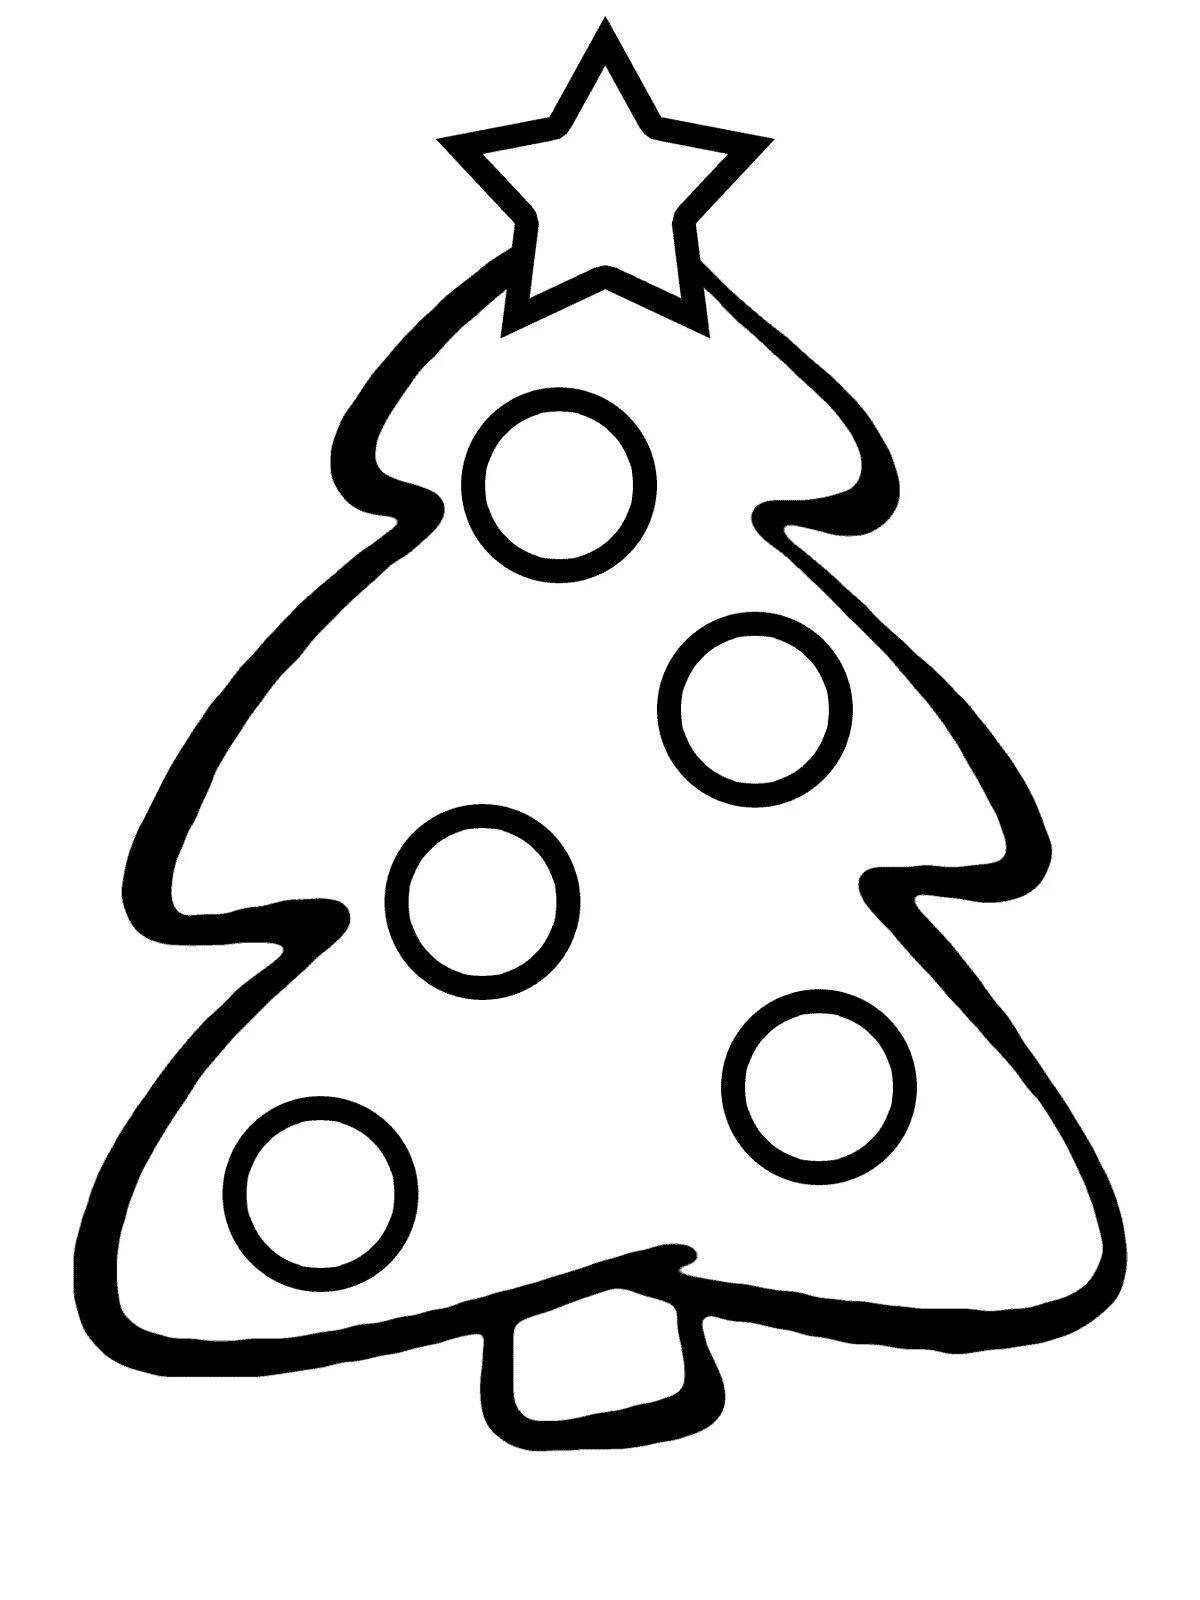 A playful Christmas tree coloring page for 6-7 year olds